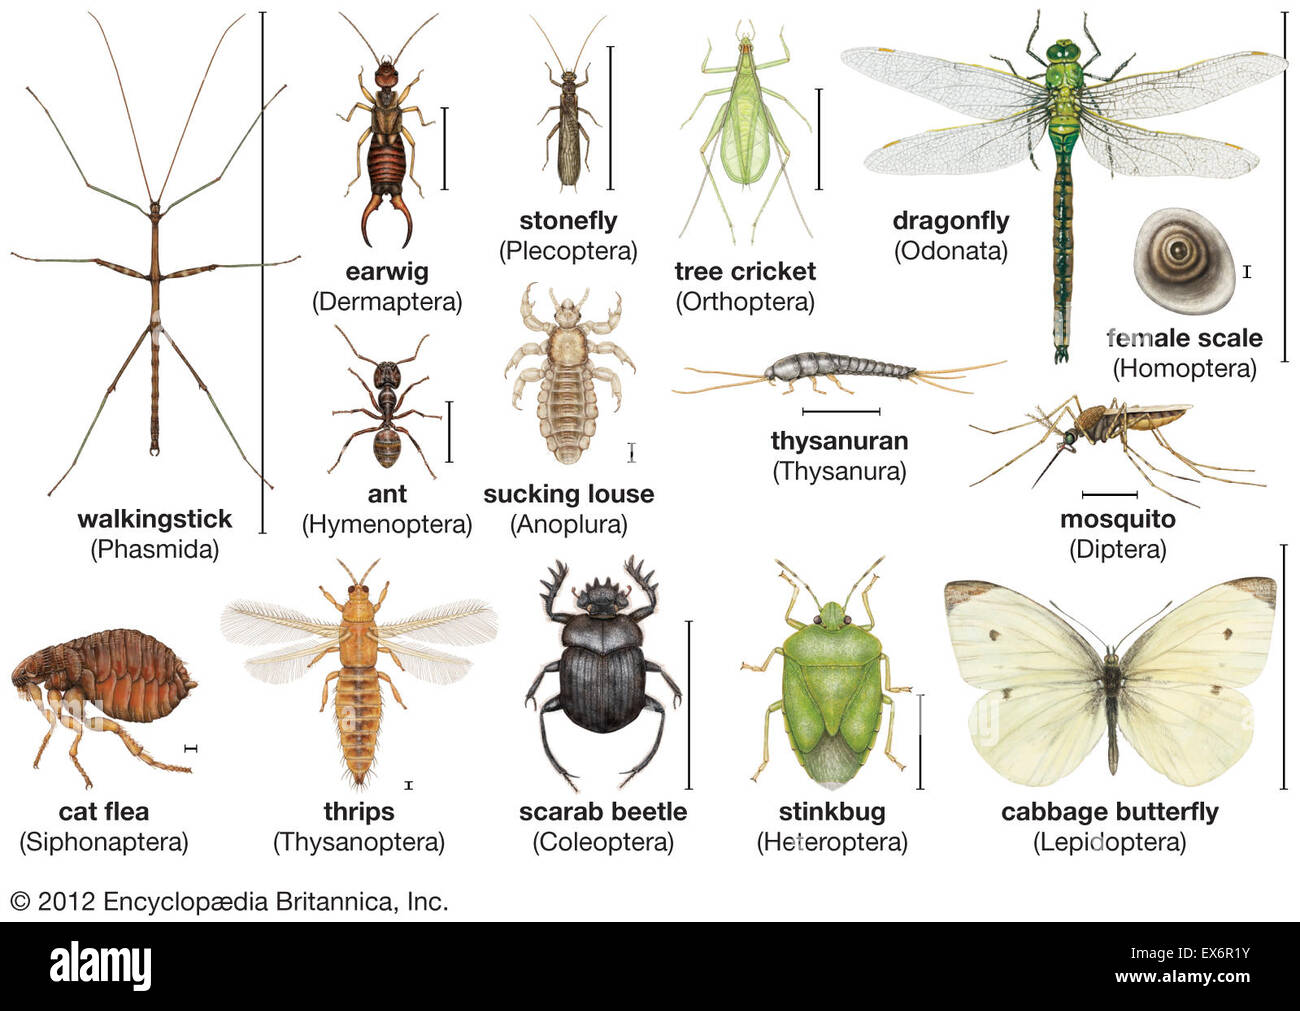 Insect diversity Stock Photo